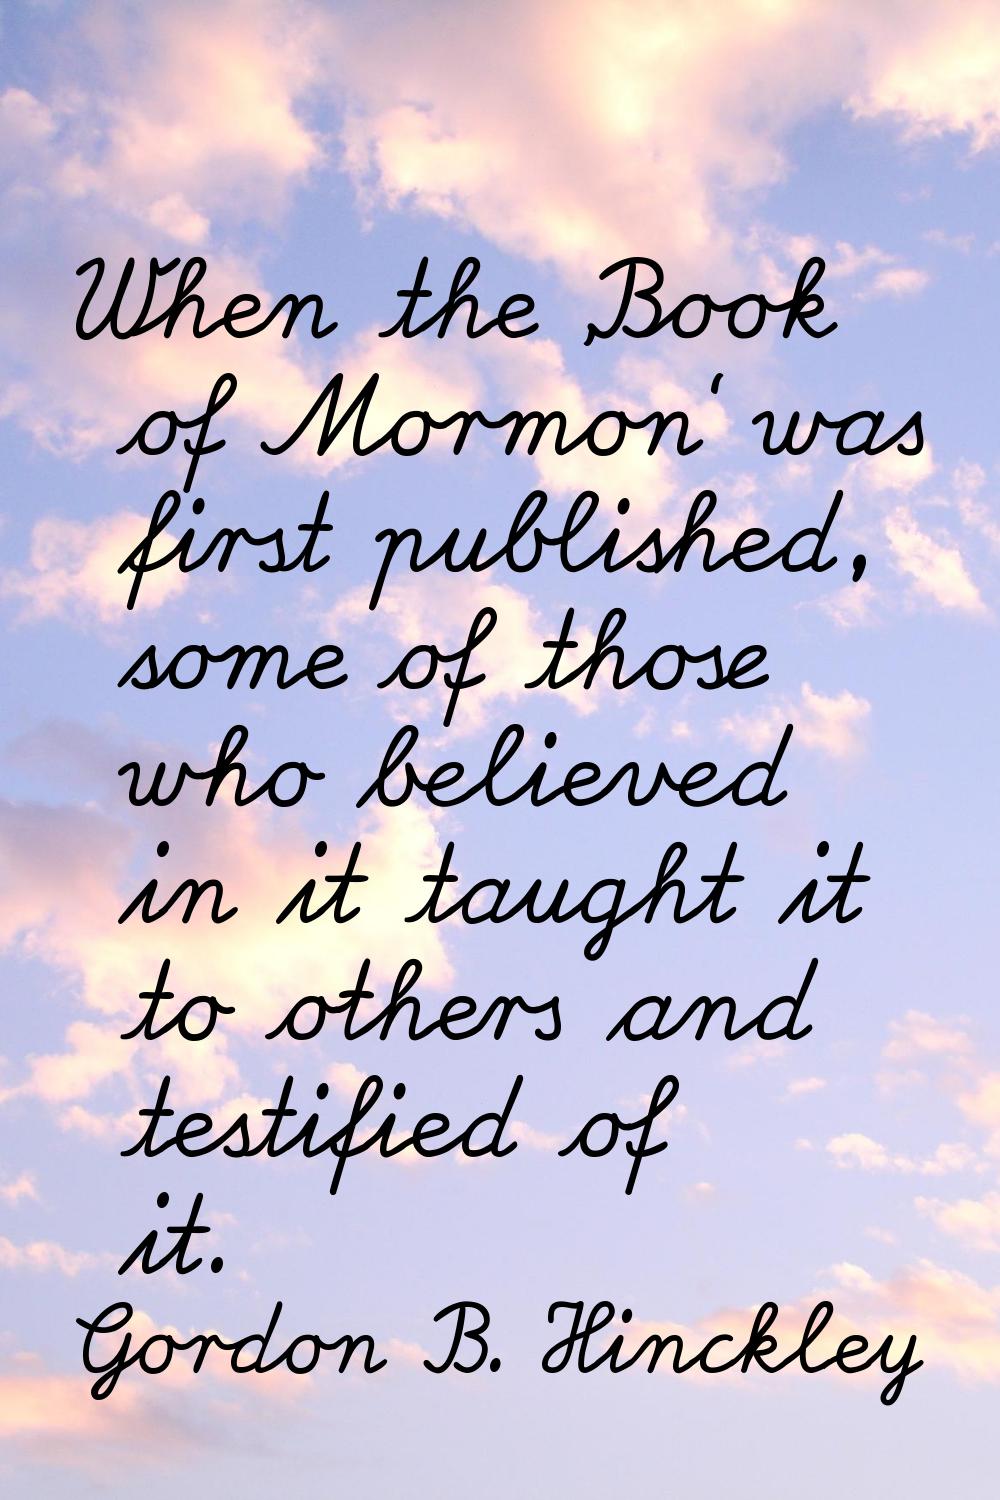 When the 'Book of Mormon' was first published, some of those who believed in it taught it to others